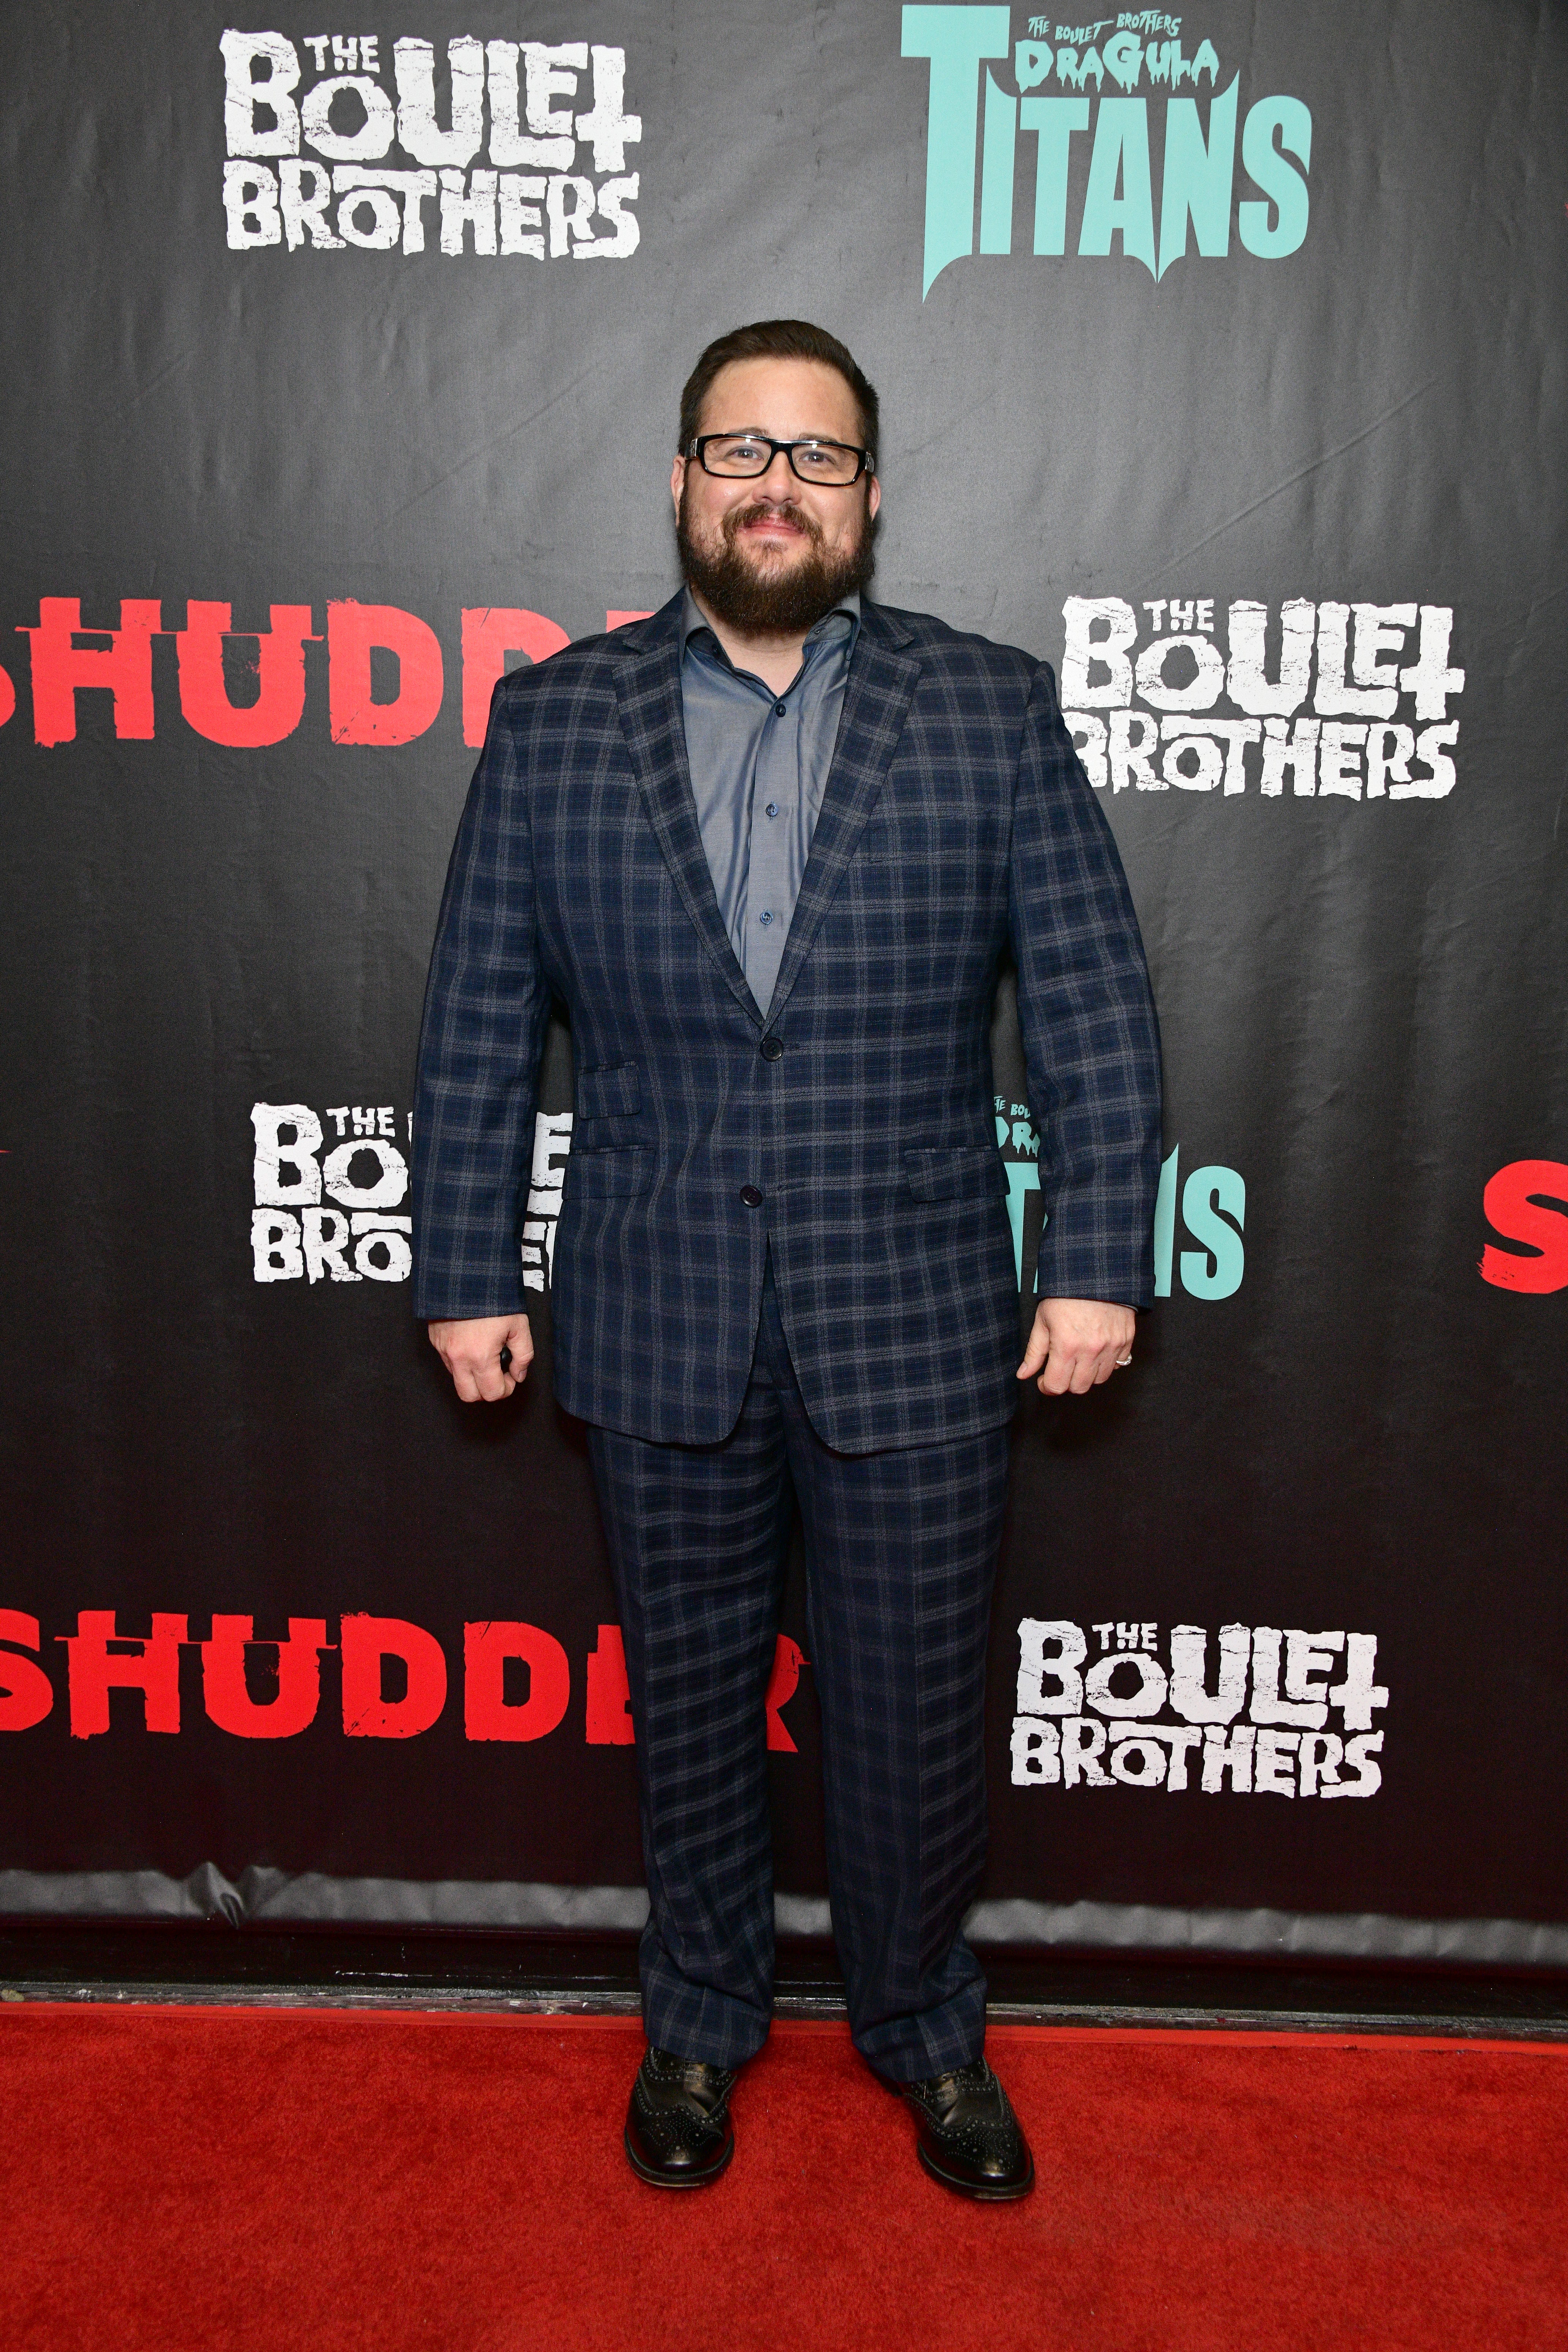 Chaz Bono attends the Los Angeles premiere of "The Boulet Brothers' Dragula: Titans" at The Montalban in Hollywood, California, on October 24, 2022. | Source: Getty Images